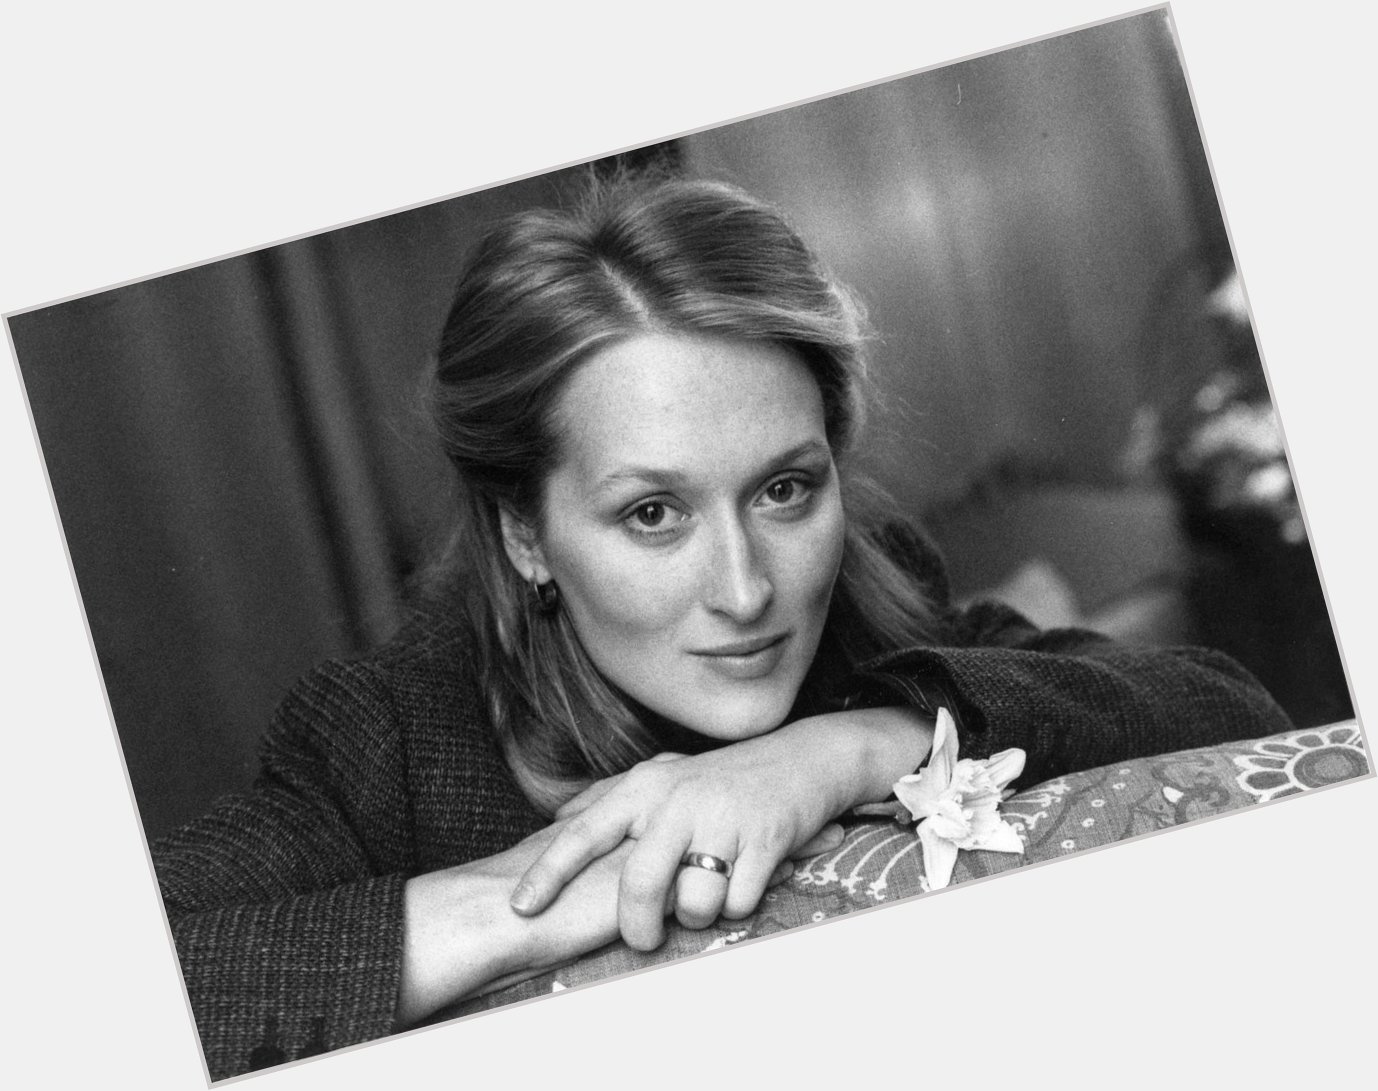 Thinking about HER today. Happy birthday to the queen of being *that* girl, the one and only Meryl Streep. 